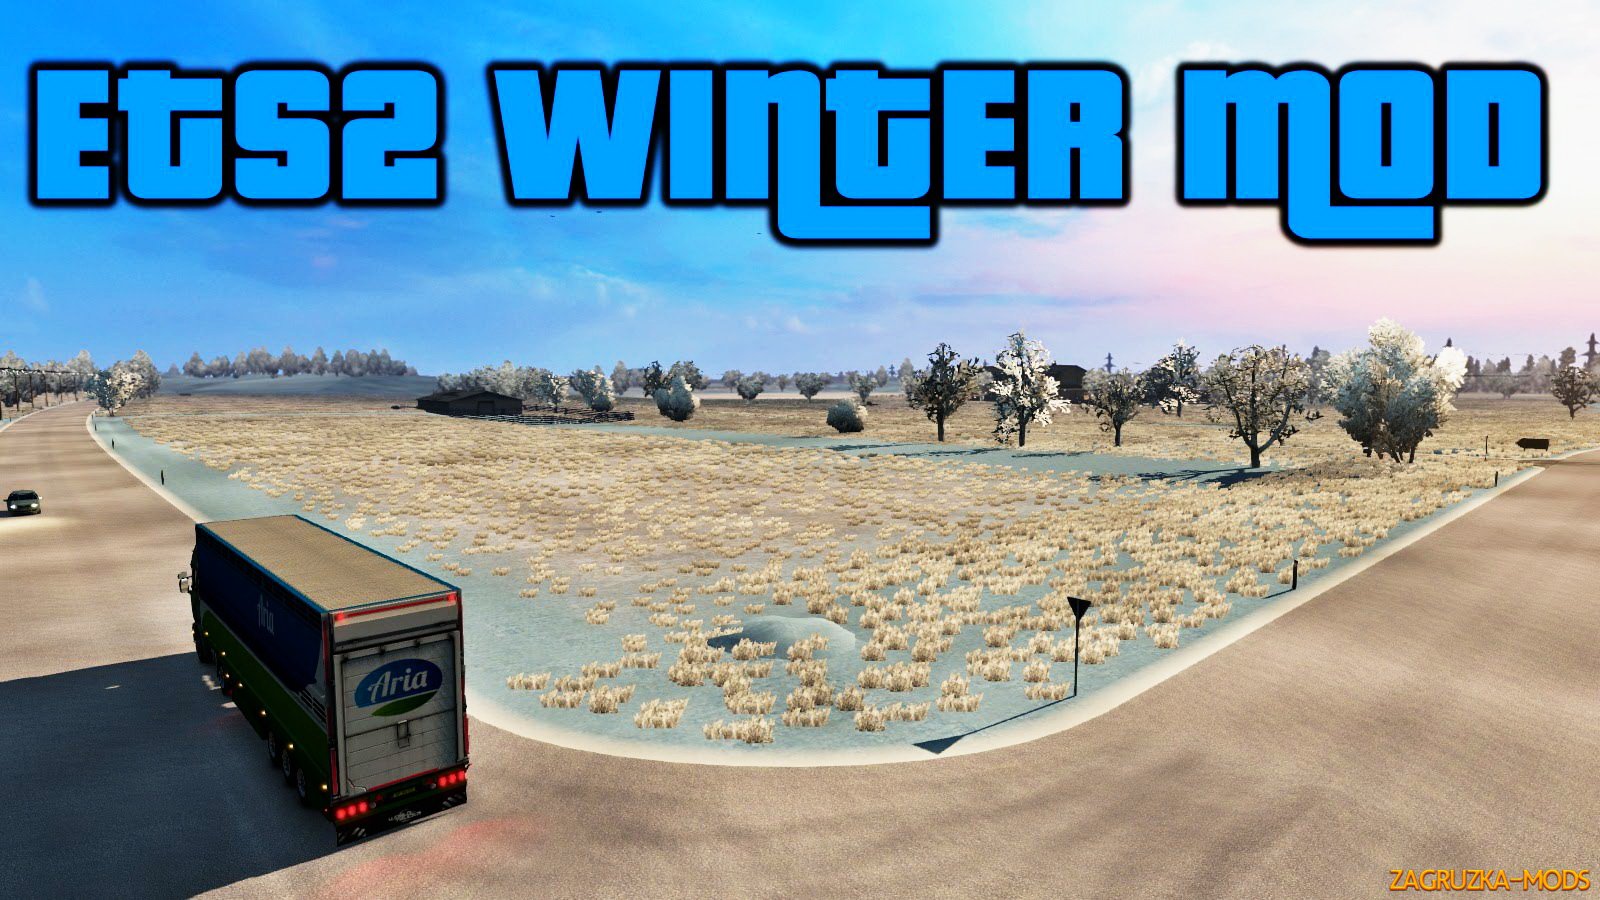 Complete Winter Mod v3.1.1 by satan19990 (1.30.x) for ETS 2